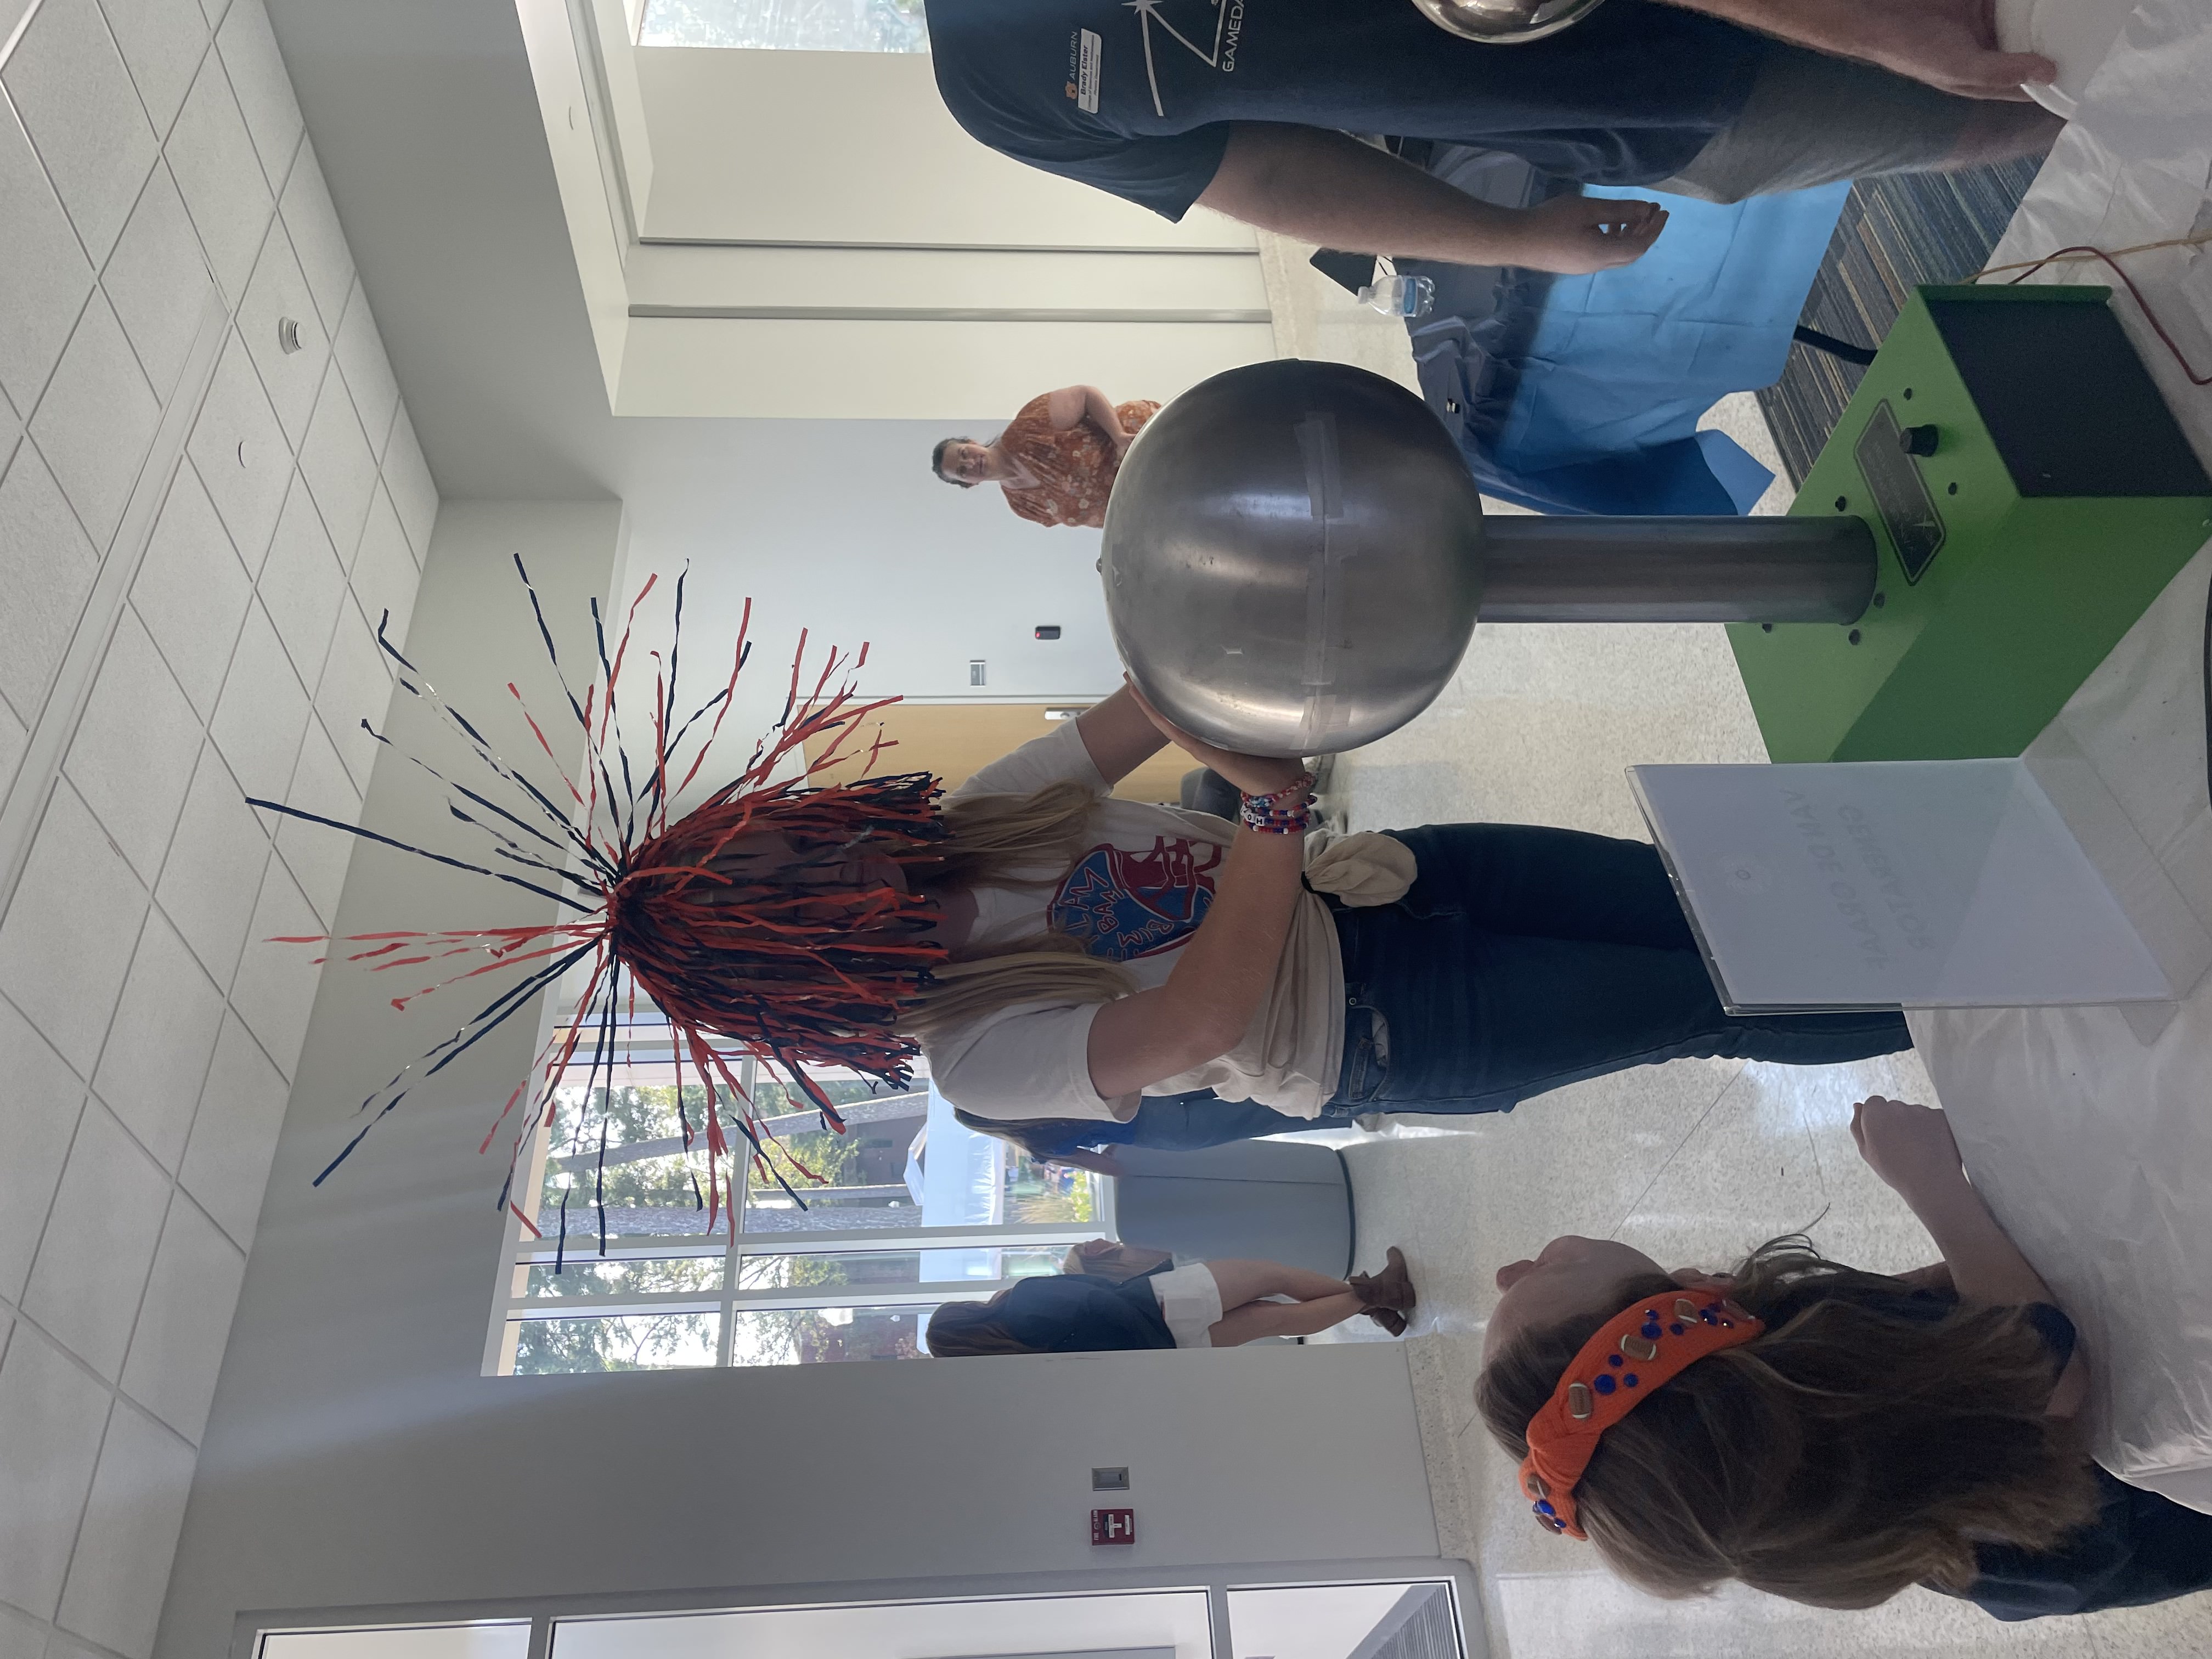 The Van de Graaf generator demonstrates static electricity through a gameday shaker. This device produces high electrical potential.